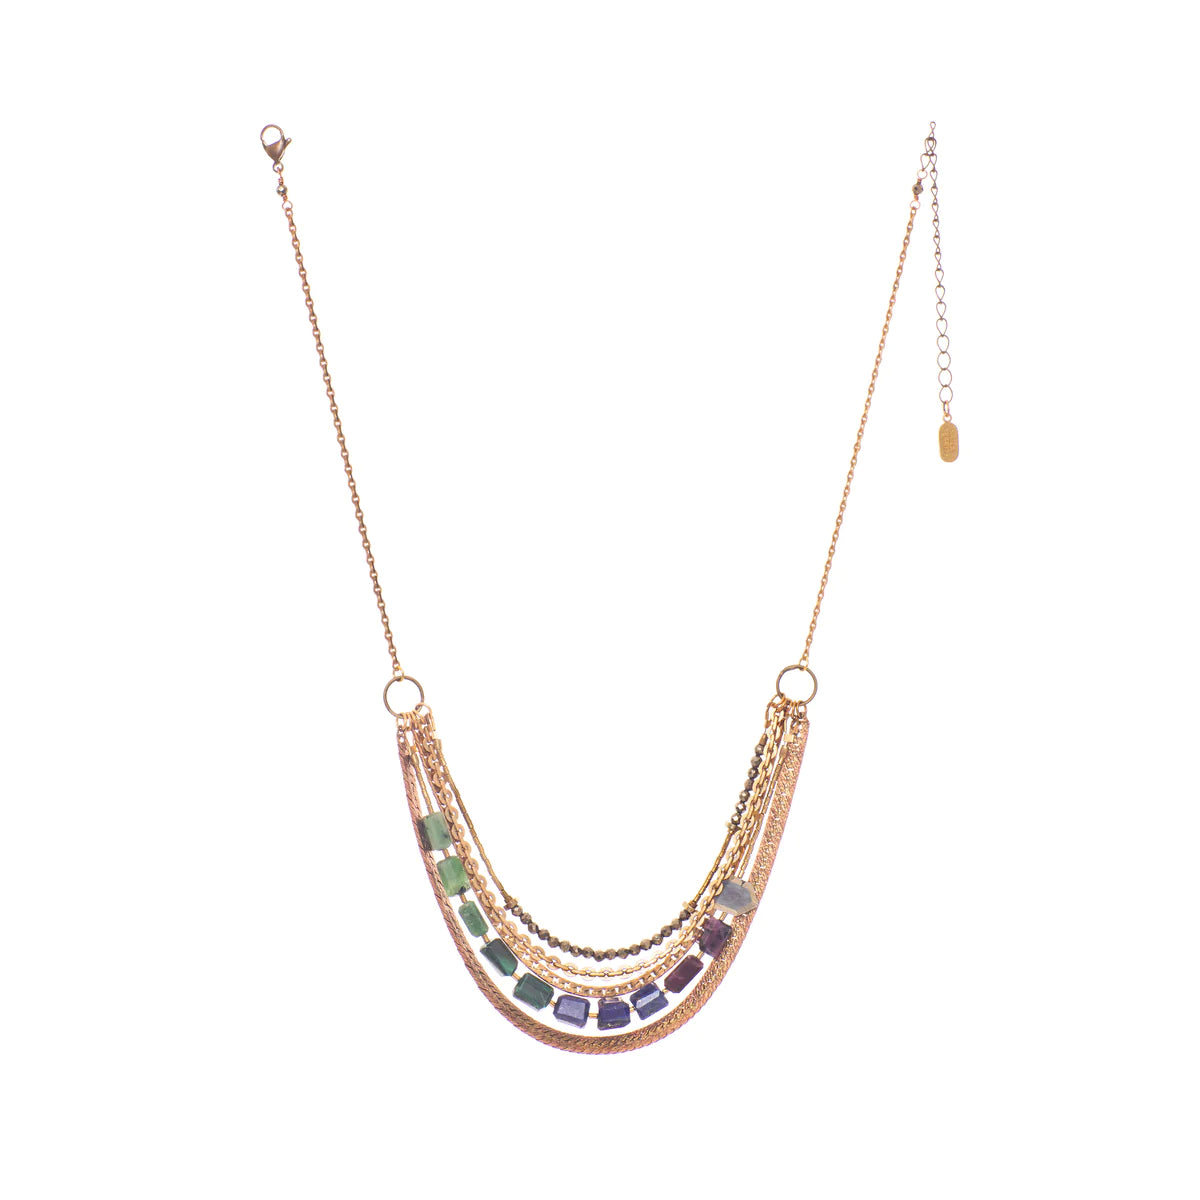 Hailey Gerrits Adouette Necklace